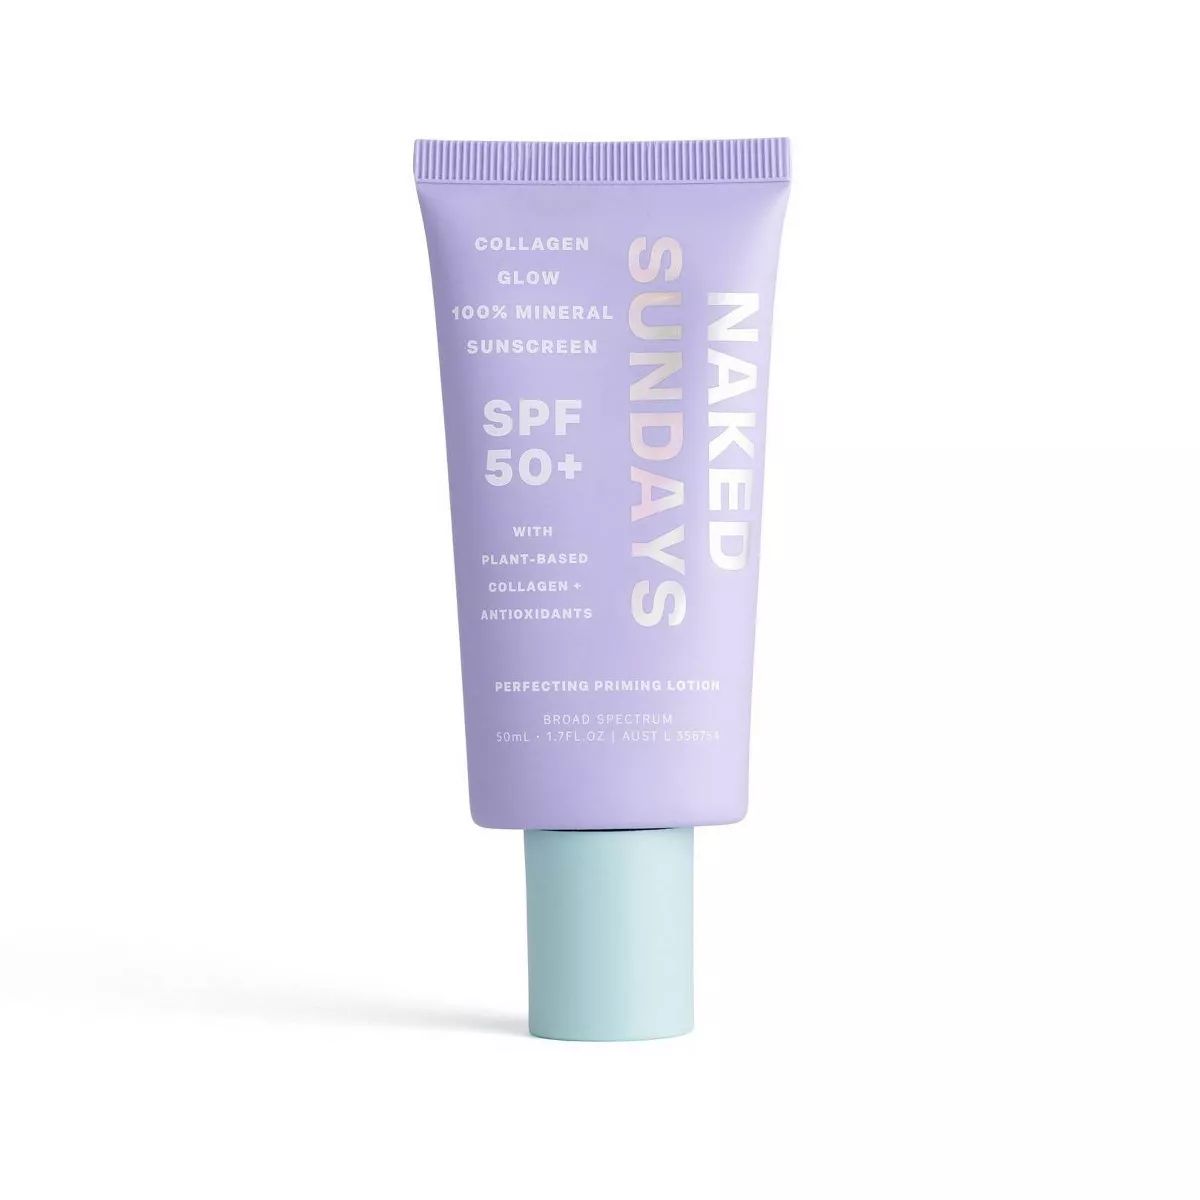 Naked Sundays Collagen Glow 100% Mineral Perfecting Priming Lotion - SPF50 + - 50ml | Target